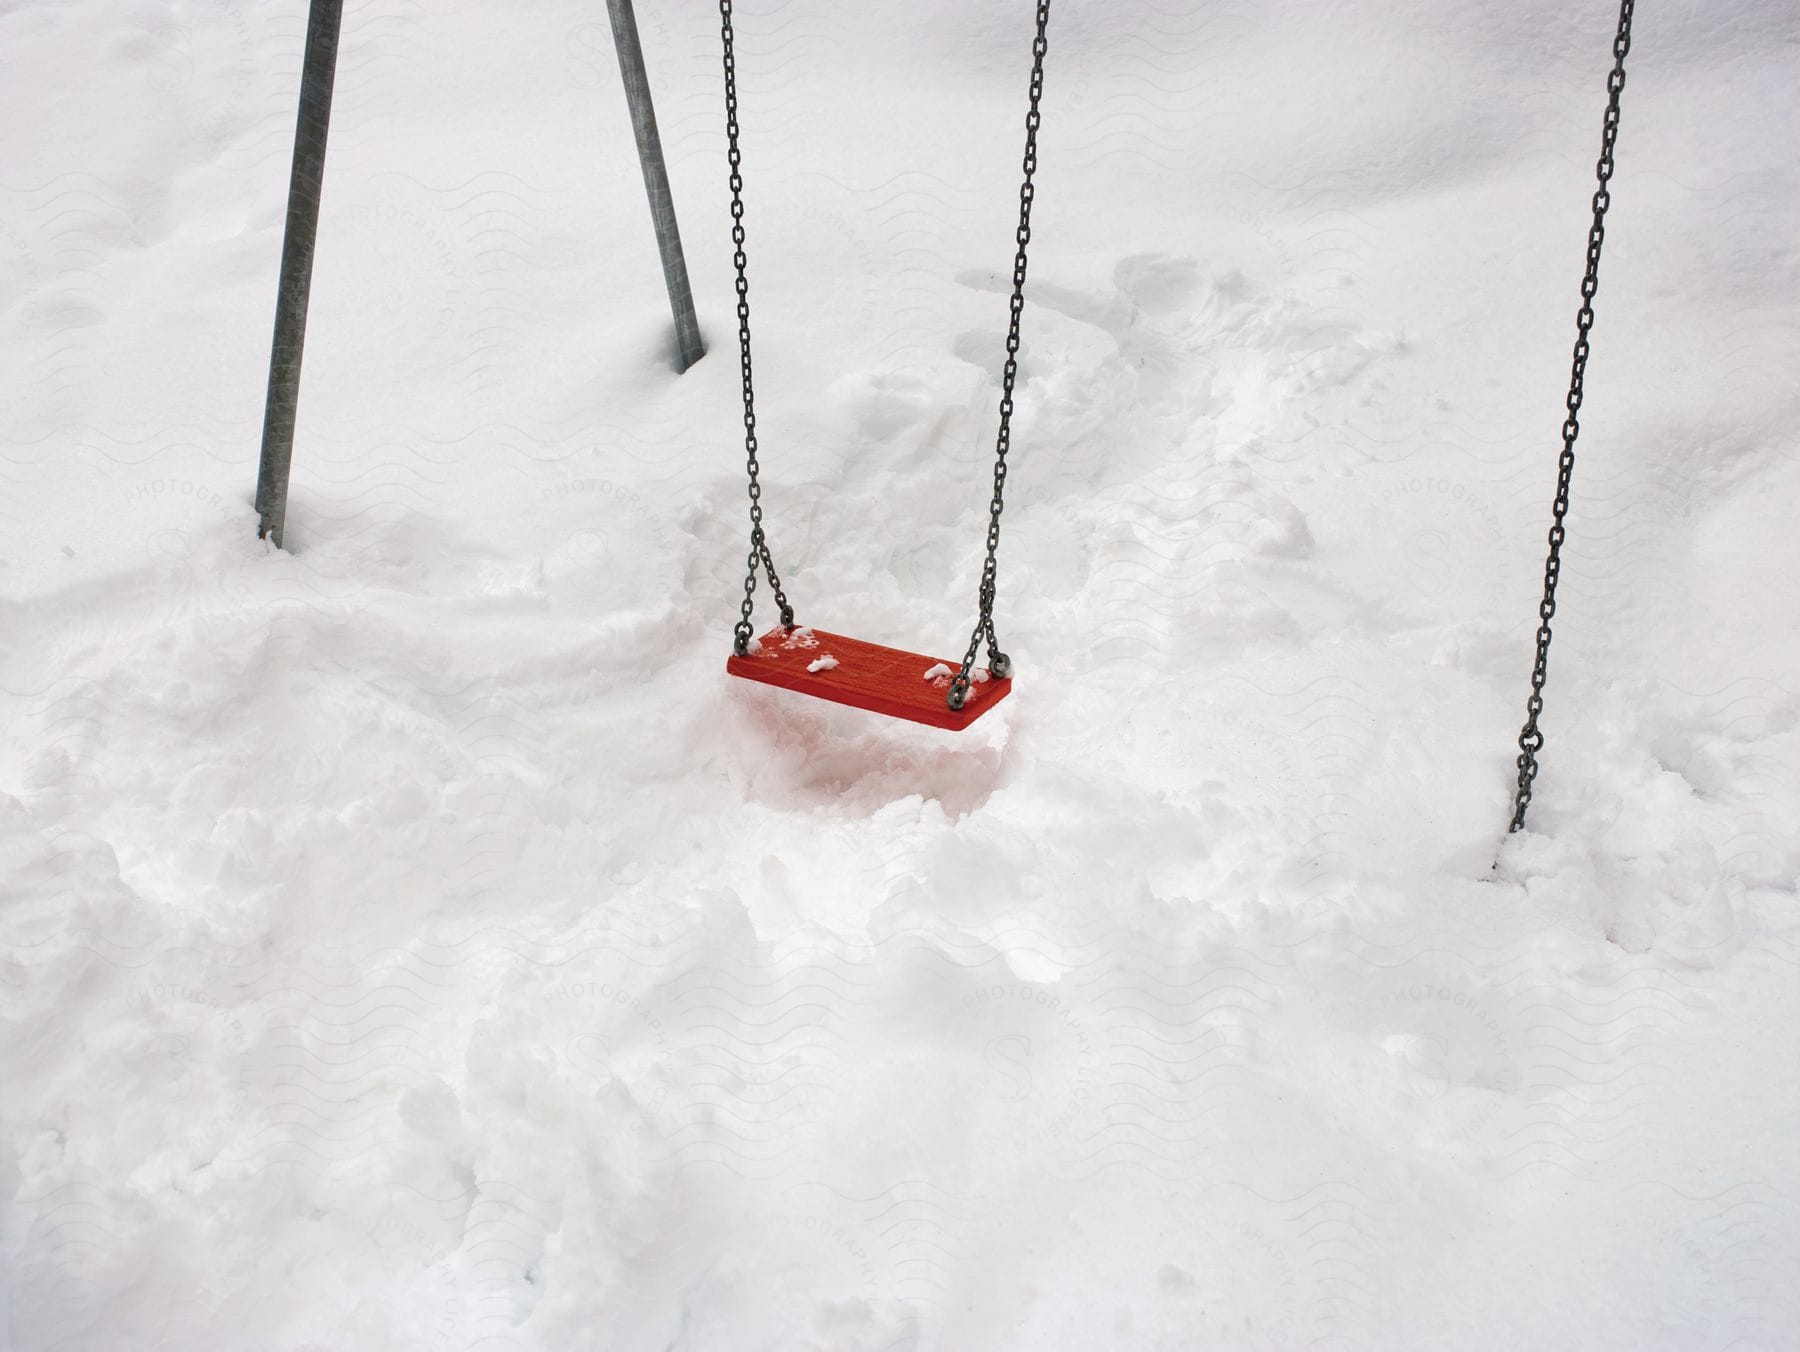 A red swing hangs over footprints in a snowcovered yard